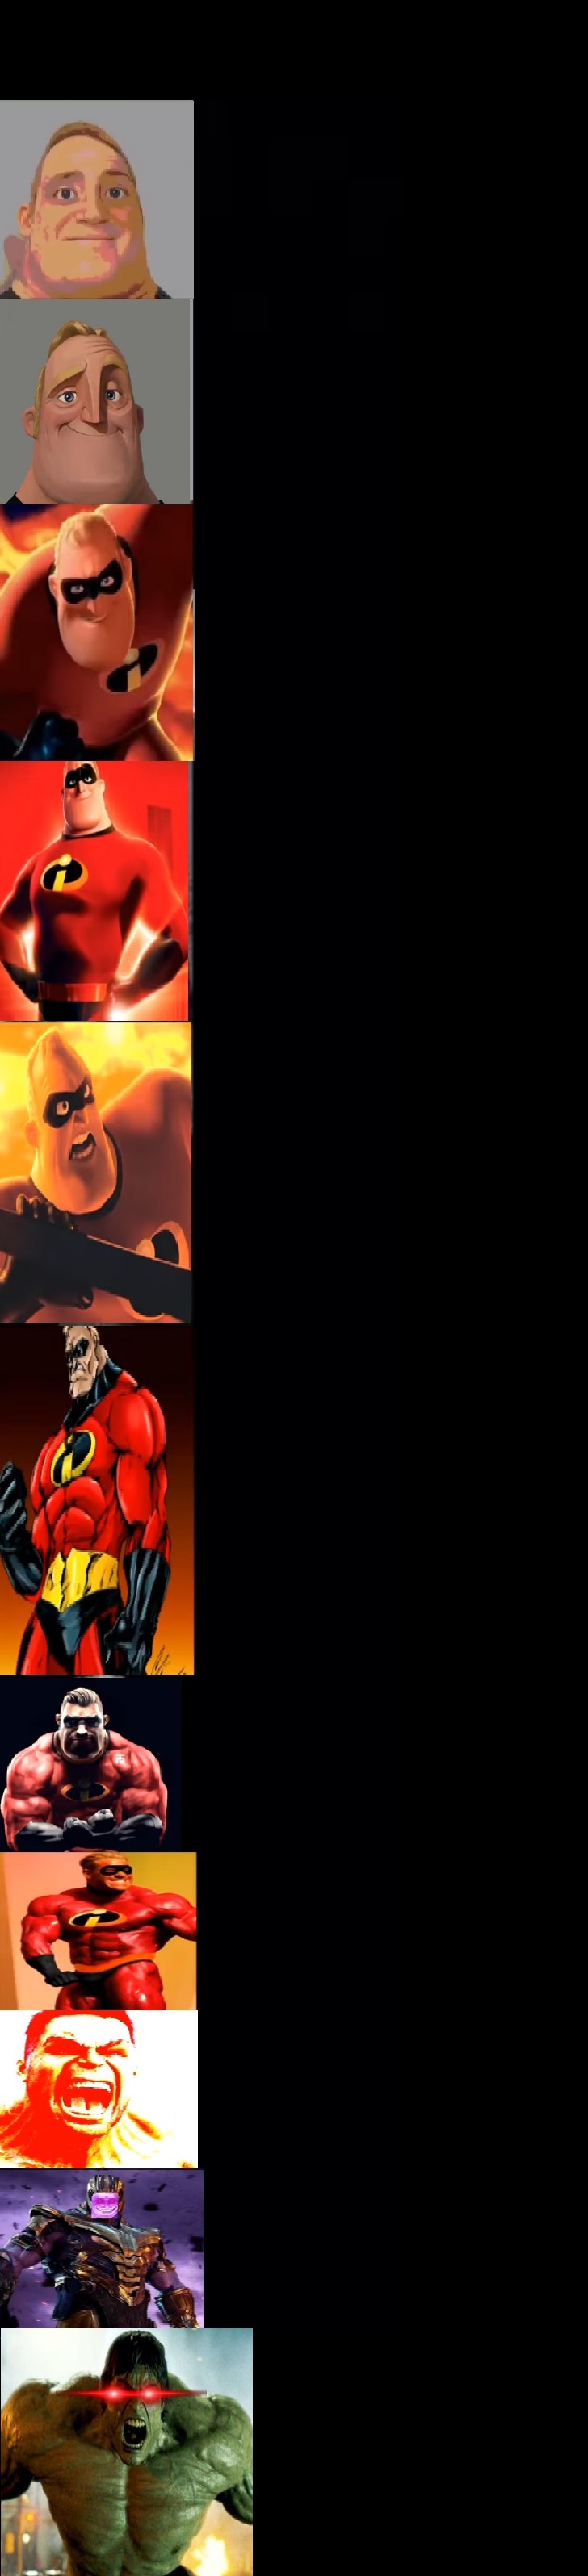 mr incredible becoming strong extended Blank Meme Template